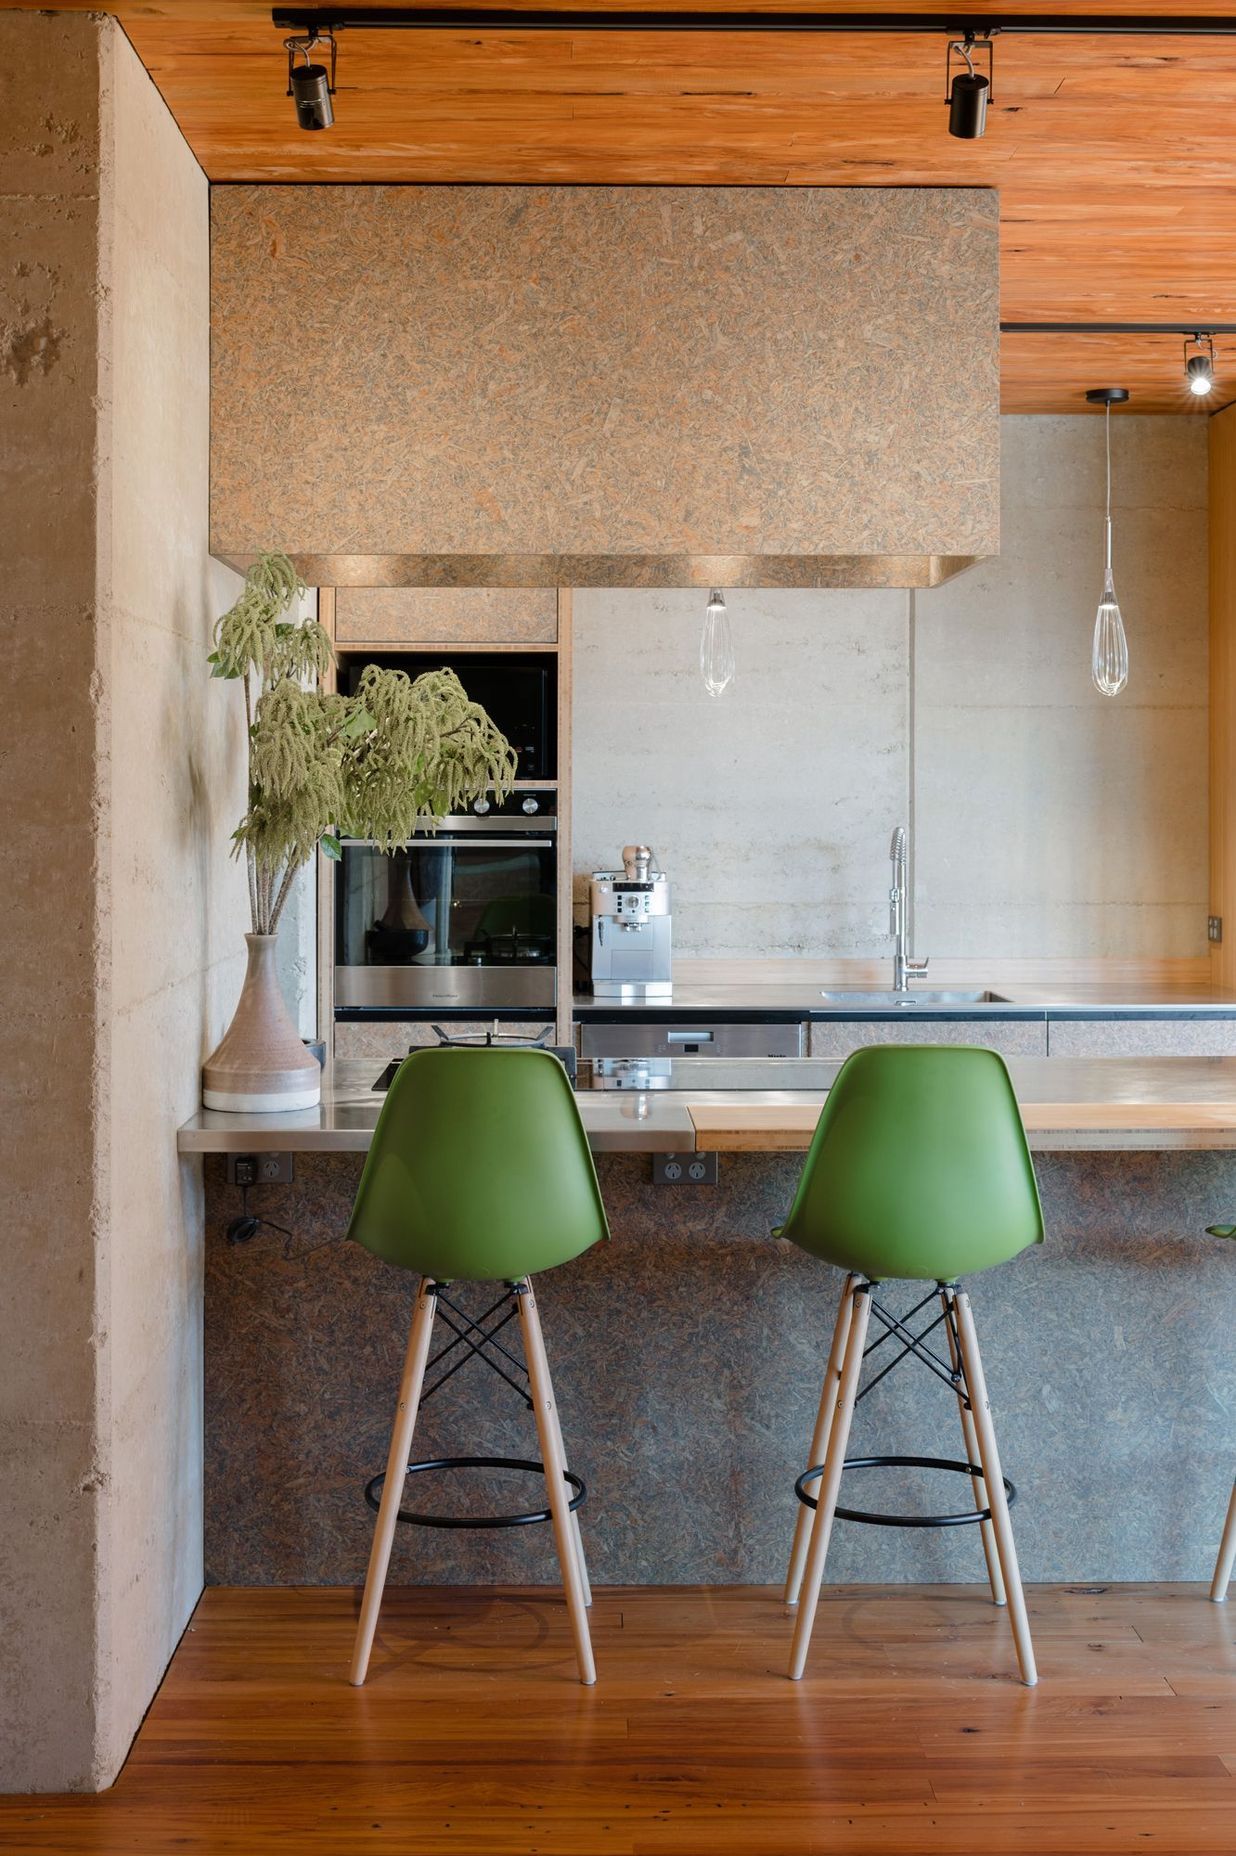 The strand board imparts a strong textural aesthetic that contrasts nicely with the rammed earth walls.